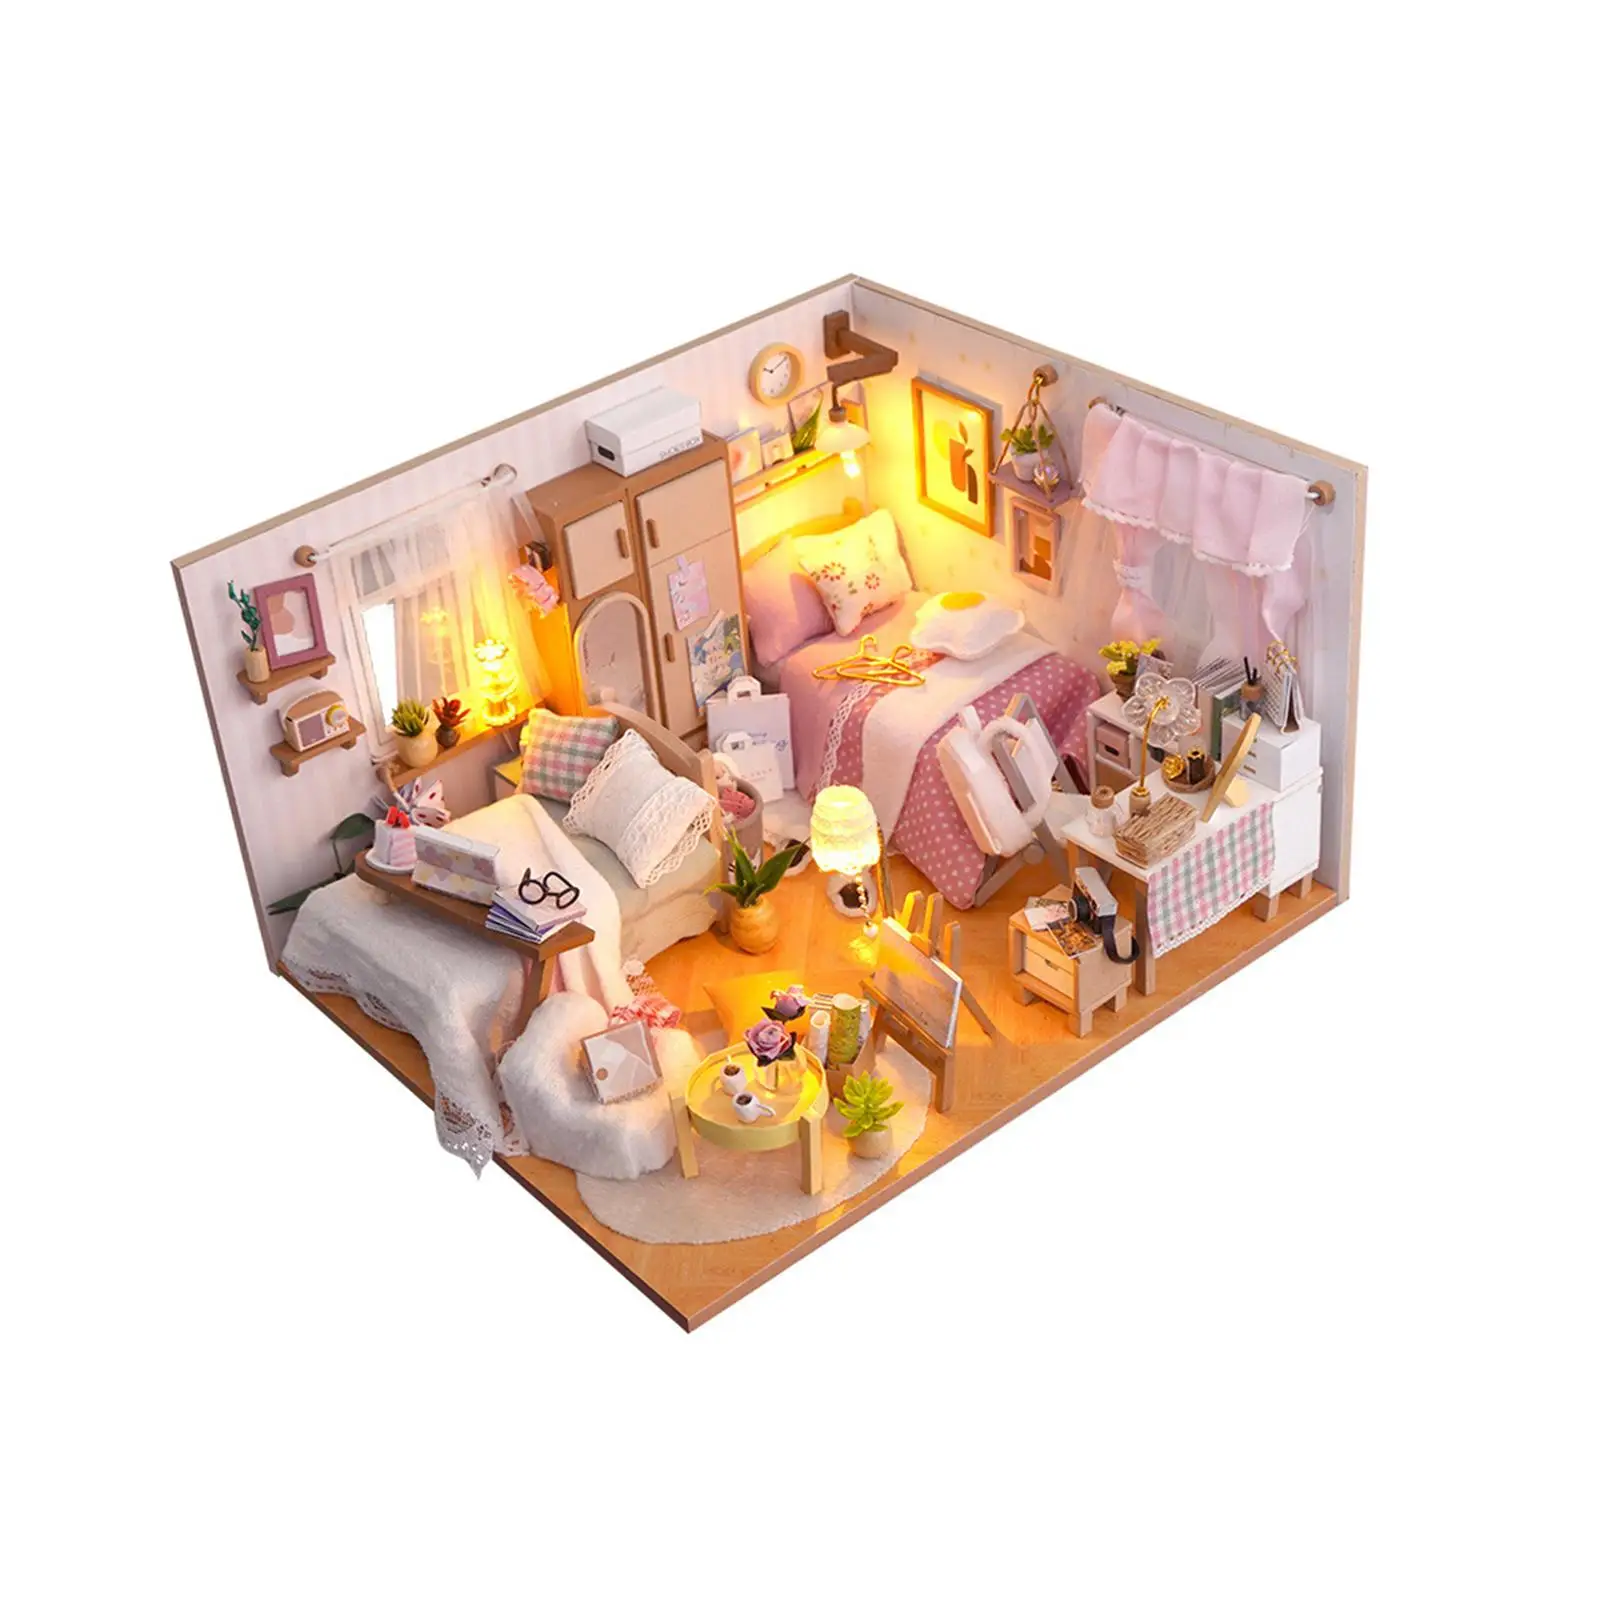 Wooden Miniature Dollhouse Kits Modern for Boys Girls Collectibles Room Box